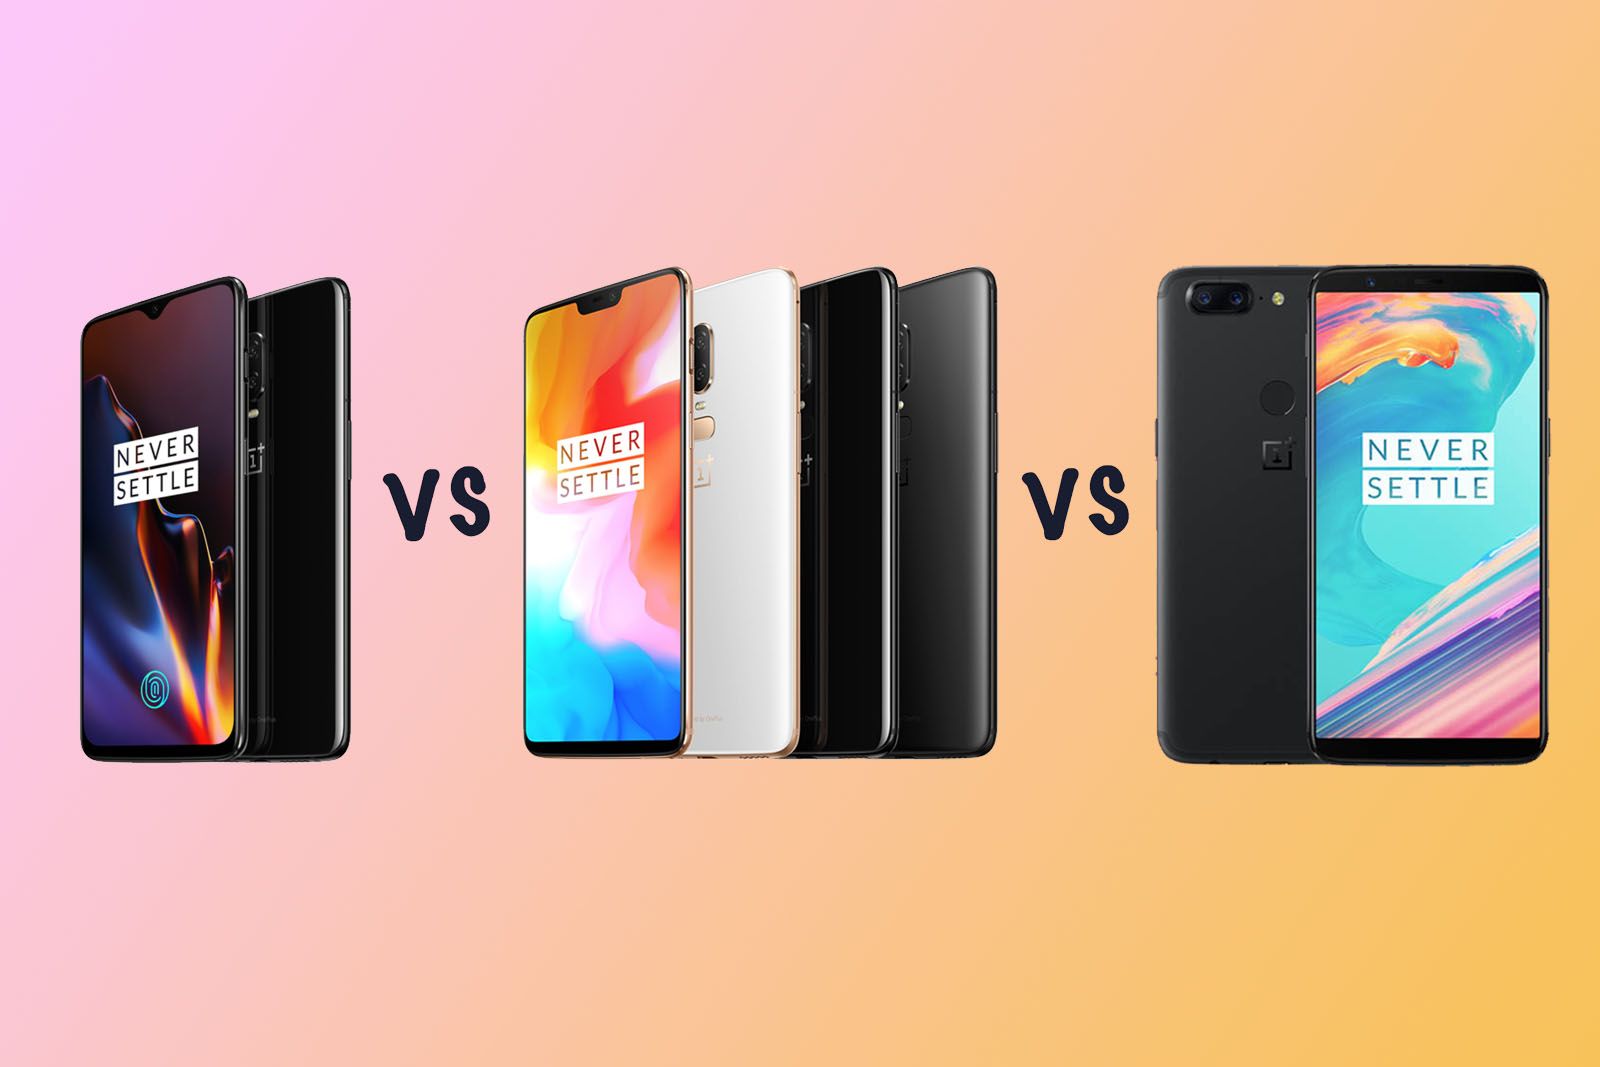 Oneplus 6t Vs 6 Vs Oneplus 5t Whats The Rumoured Difference image 1